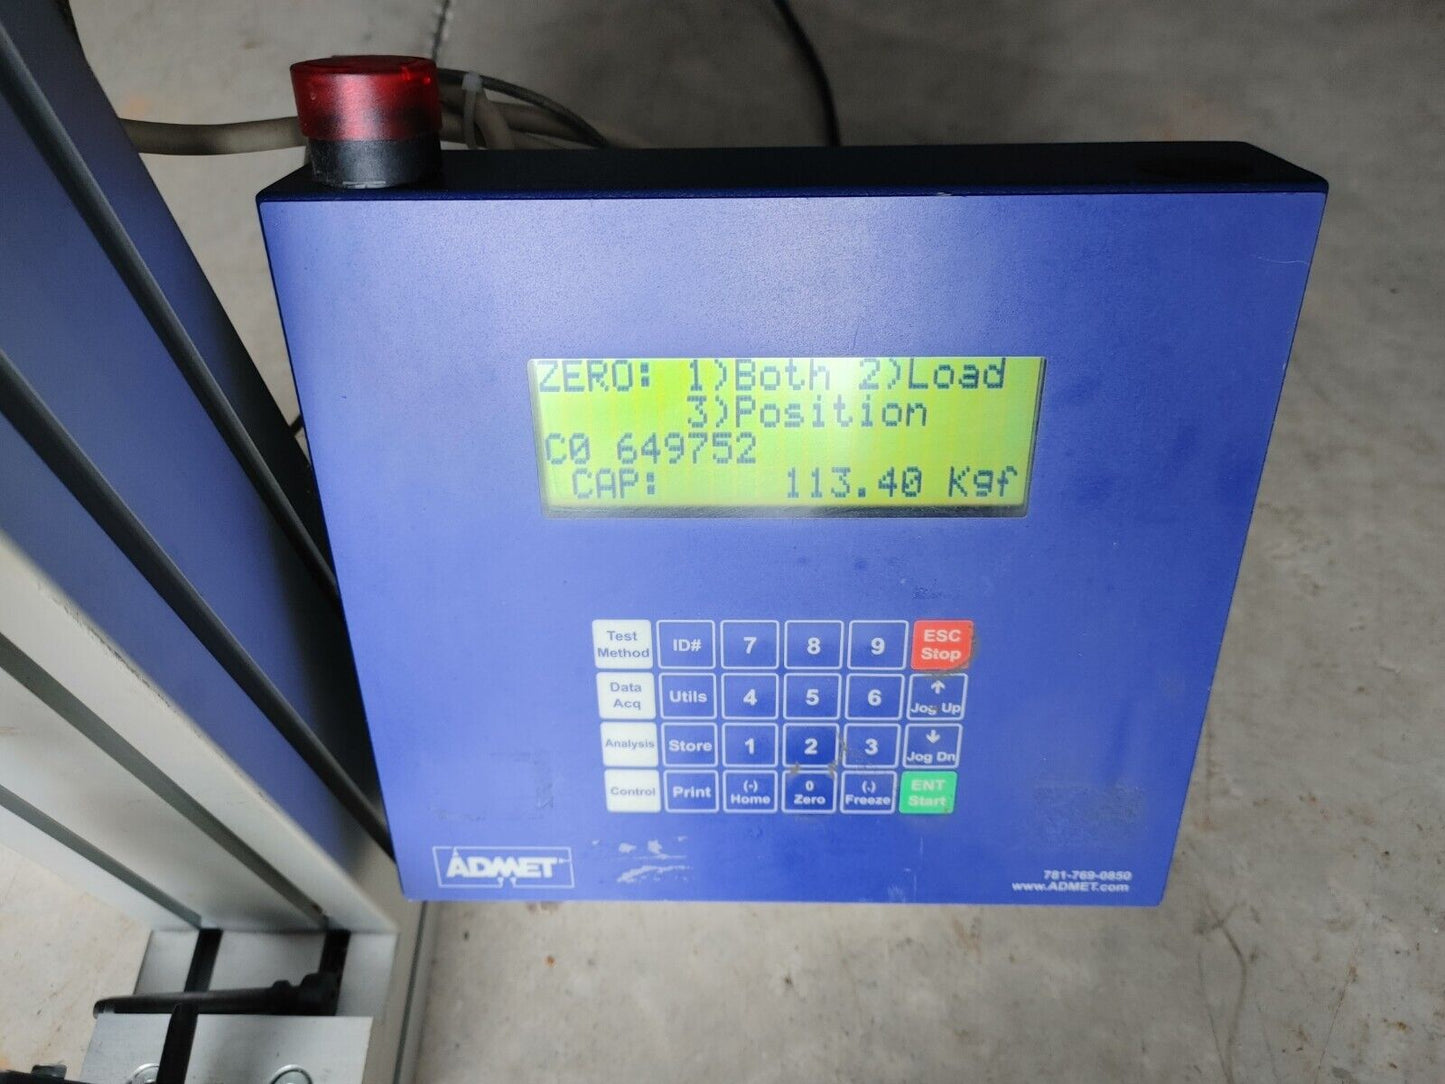 ADMET MATERIAL FATIGUE TESTER 250lbf | INTERFACE TRANSDUCER Warranty & Free Ship